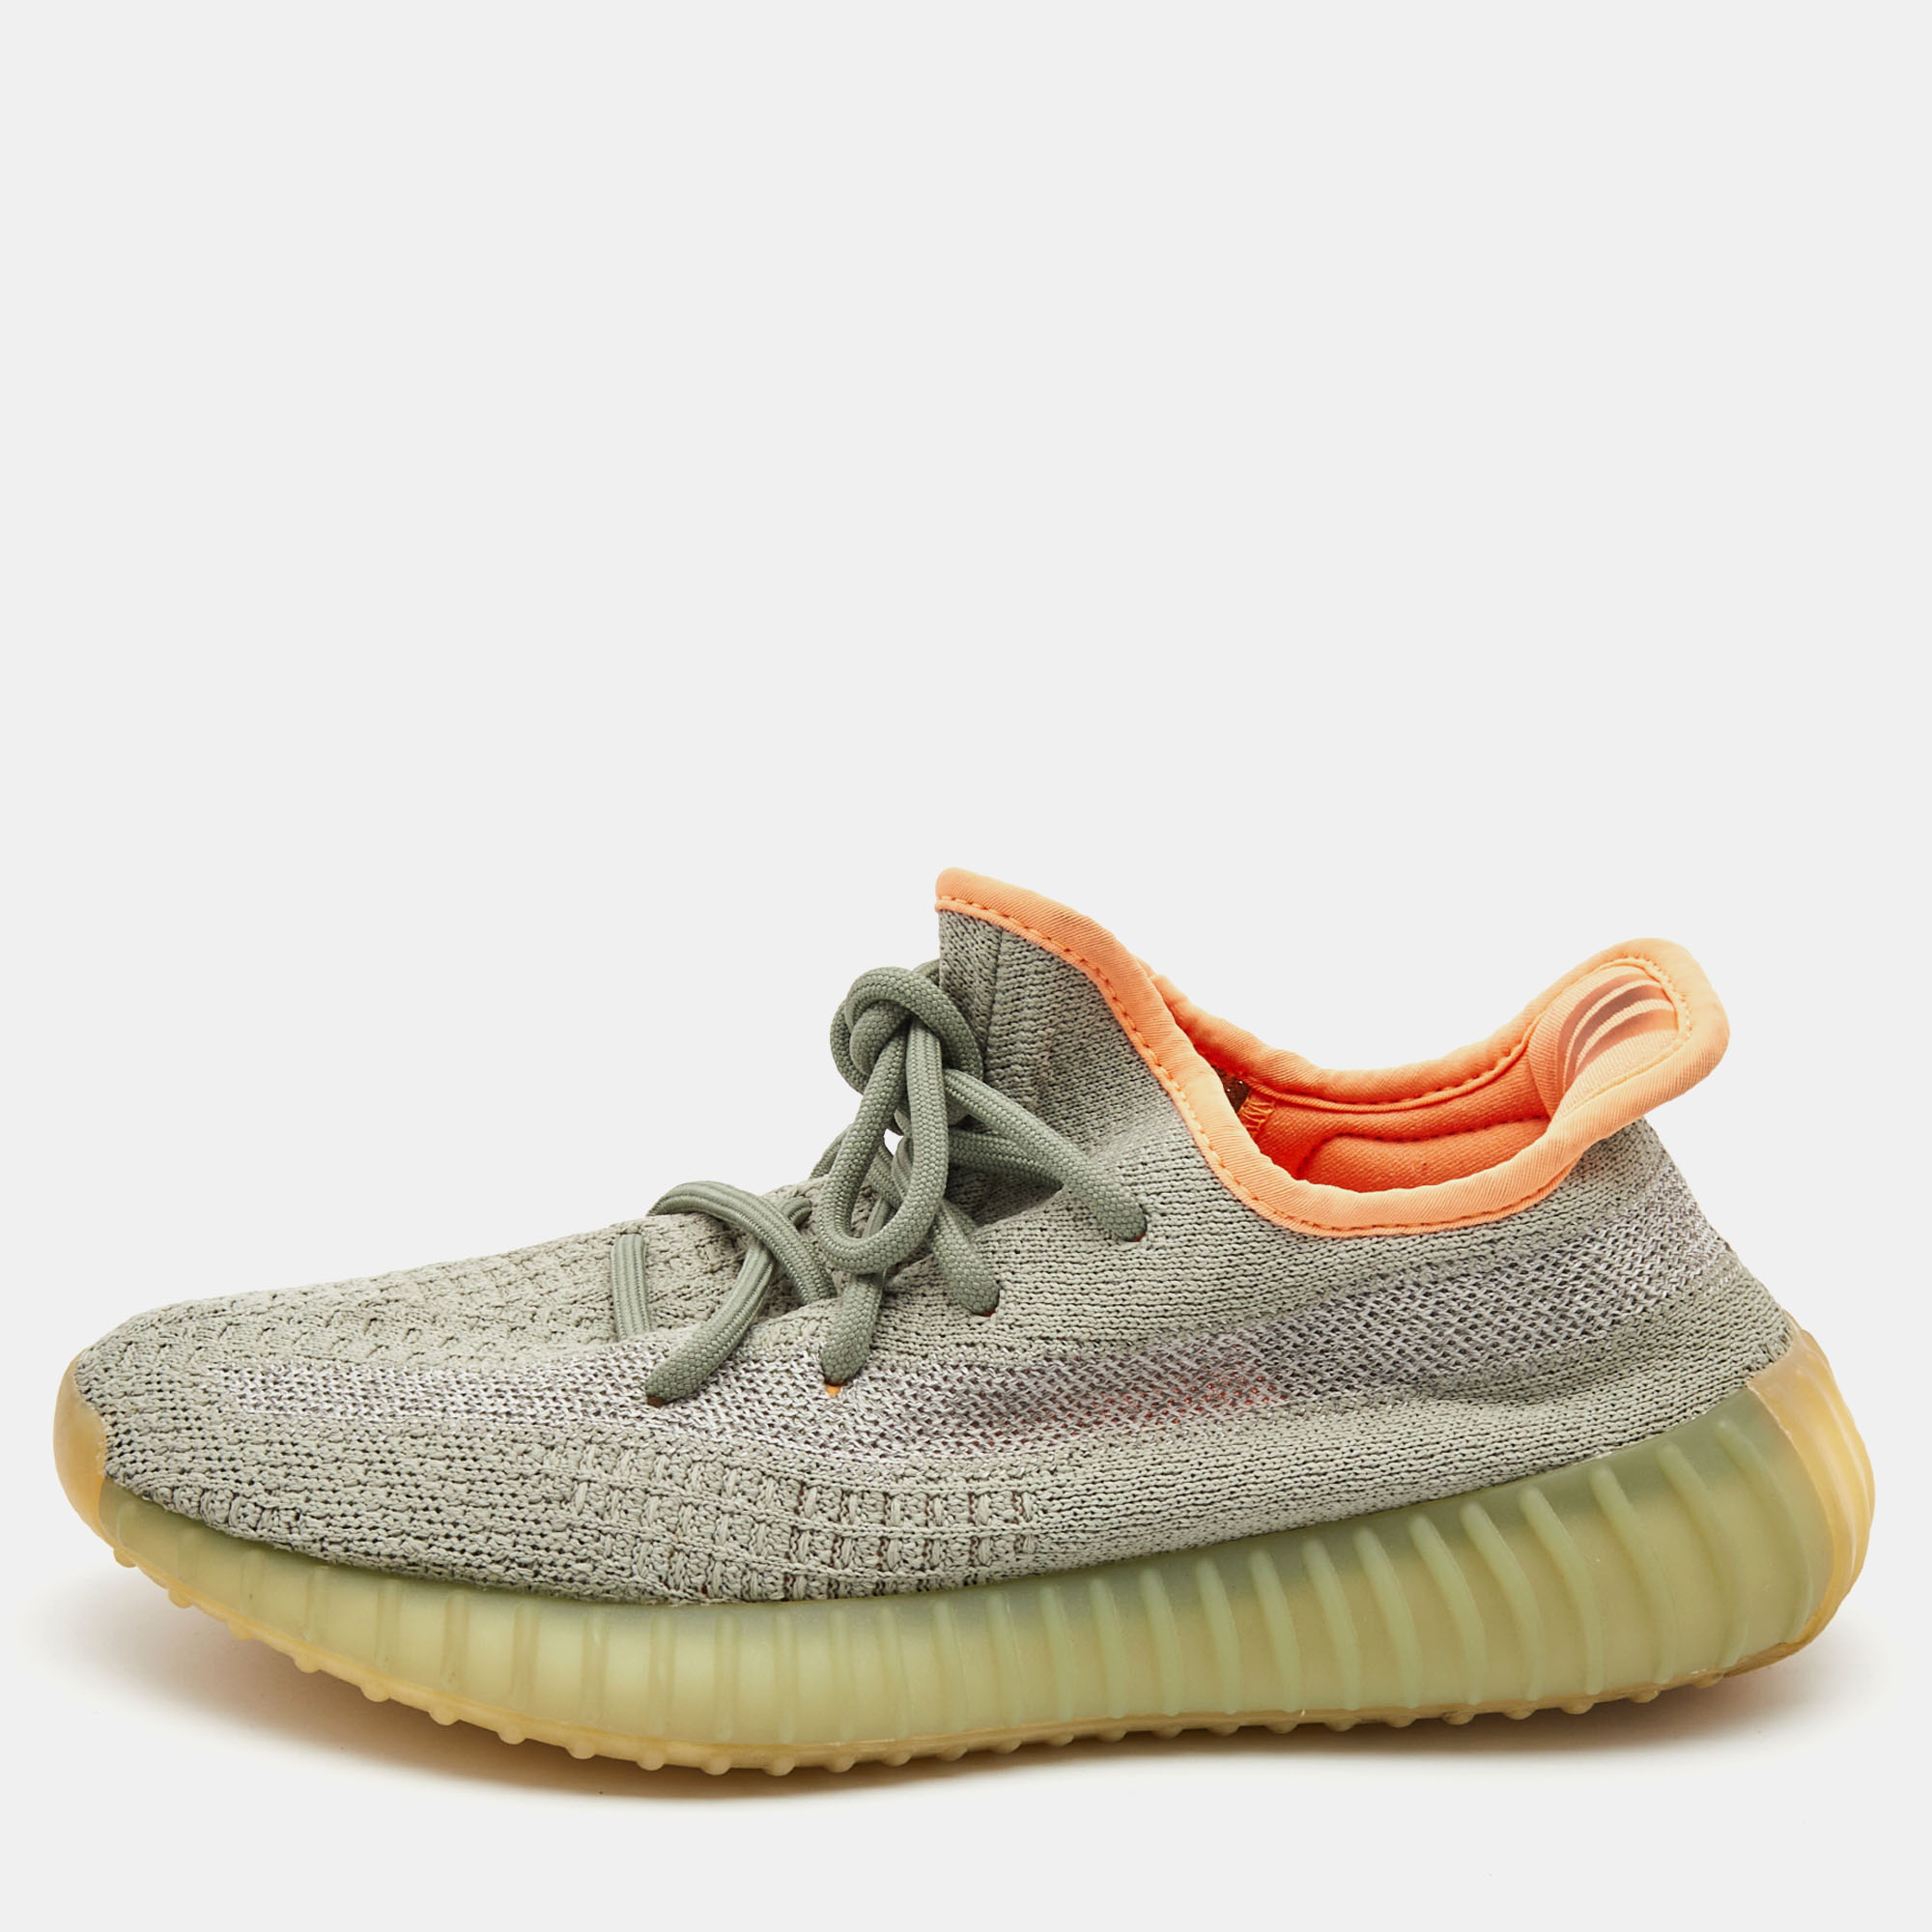 

Yeezy x Adidas Green Fabric Boost 350 V2 Desert-Sage Sneakers Size